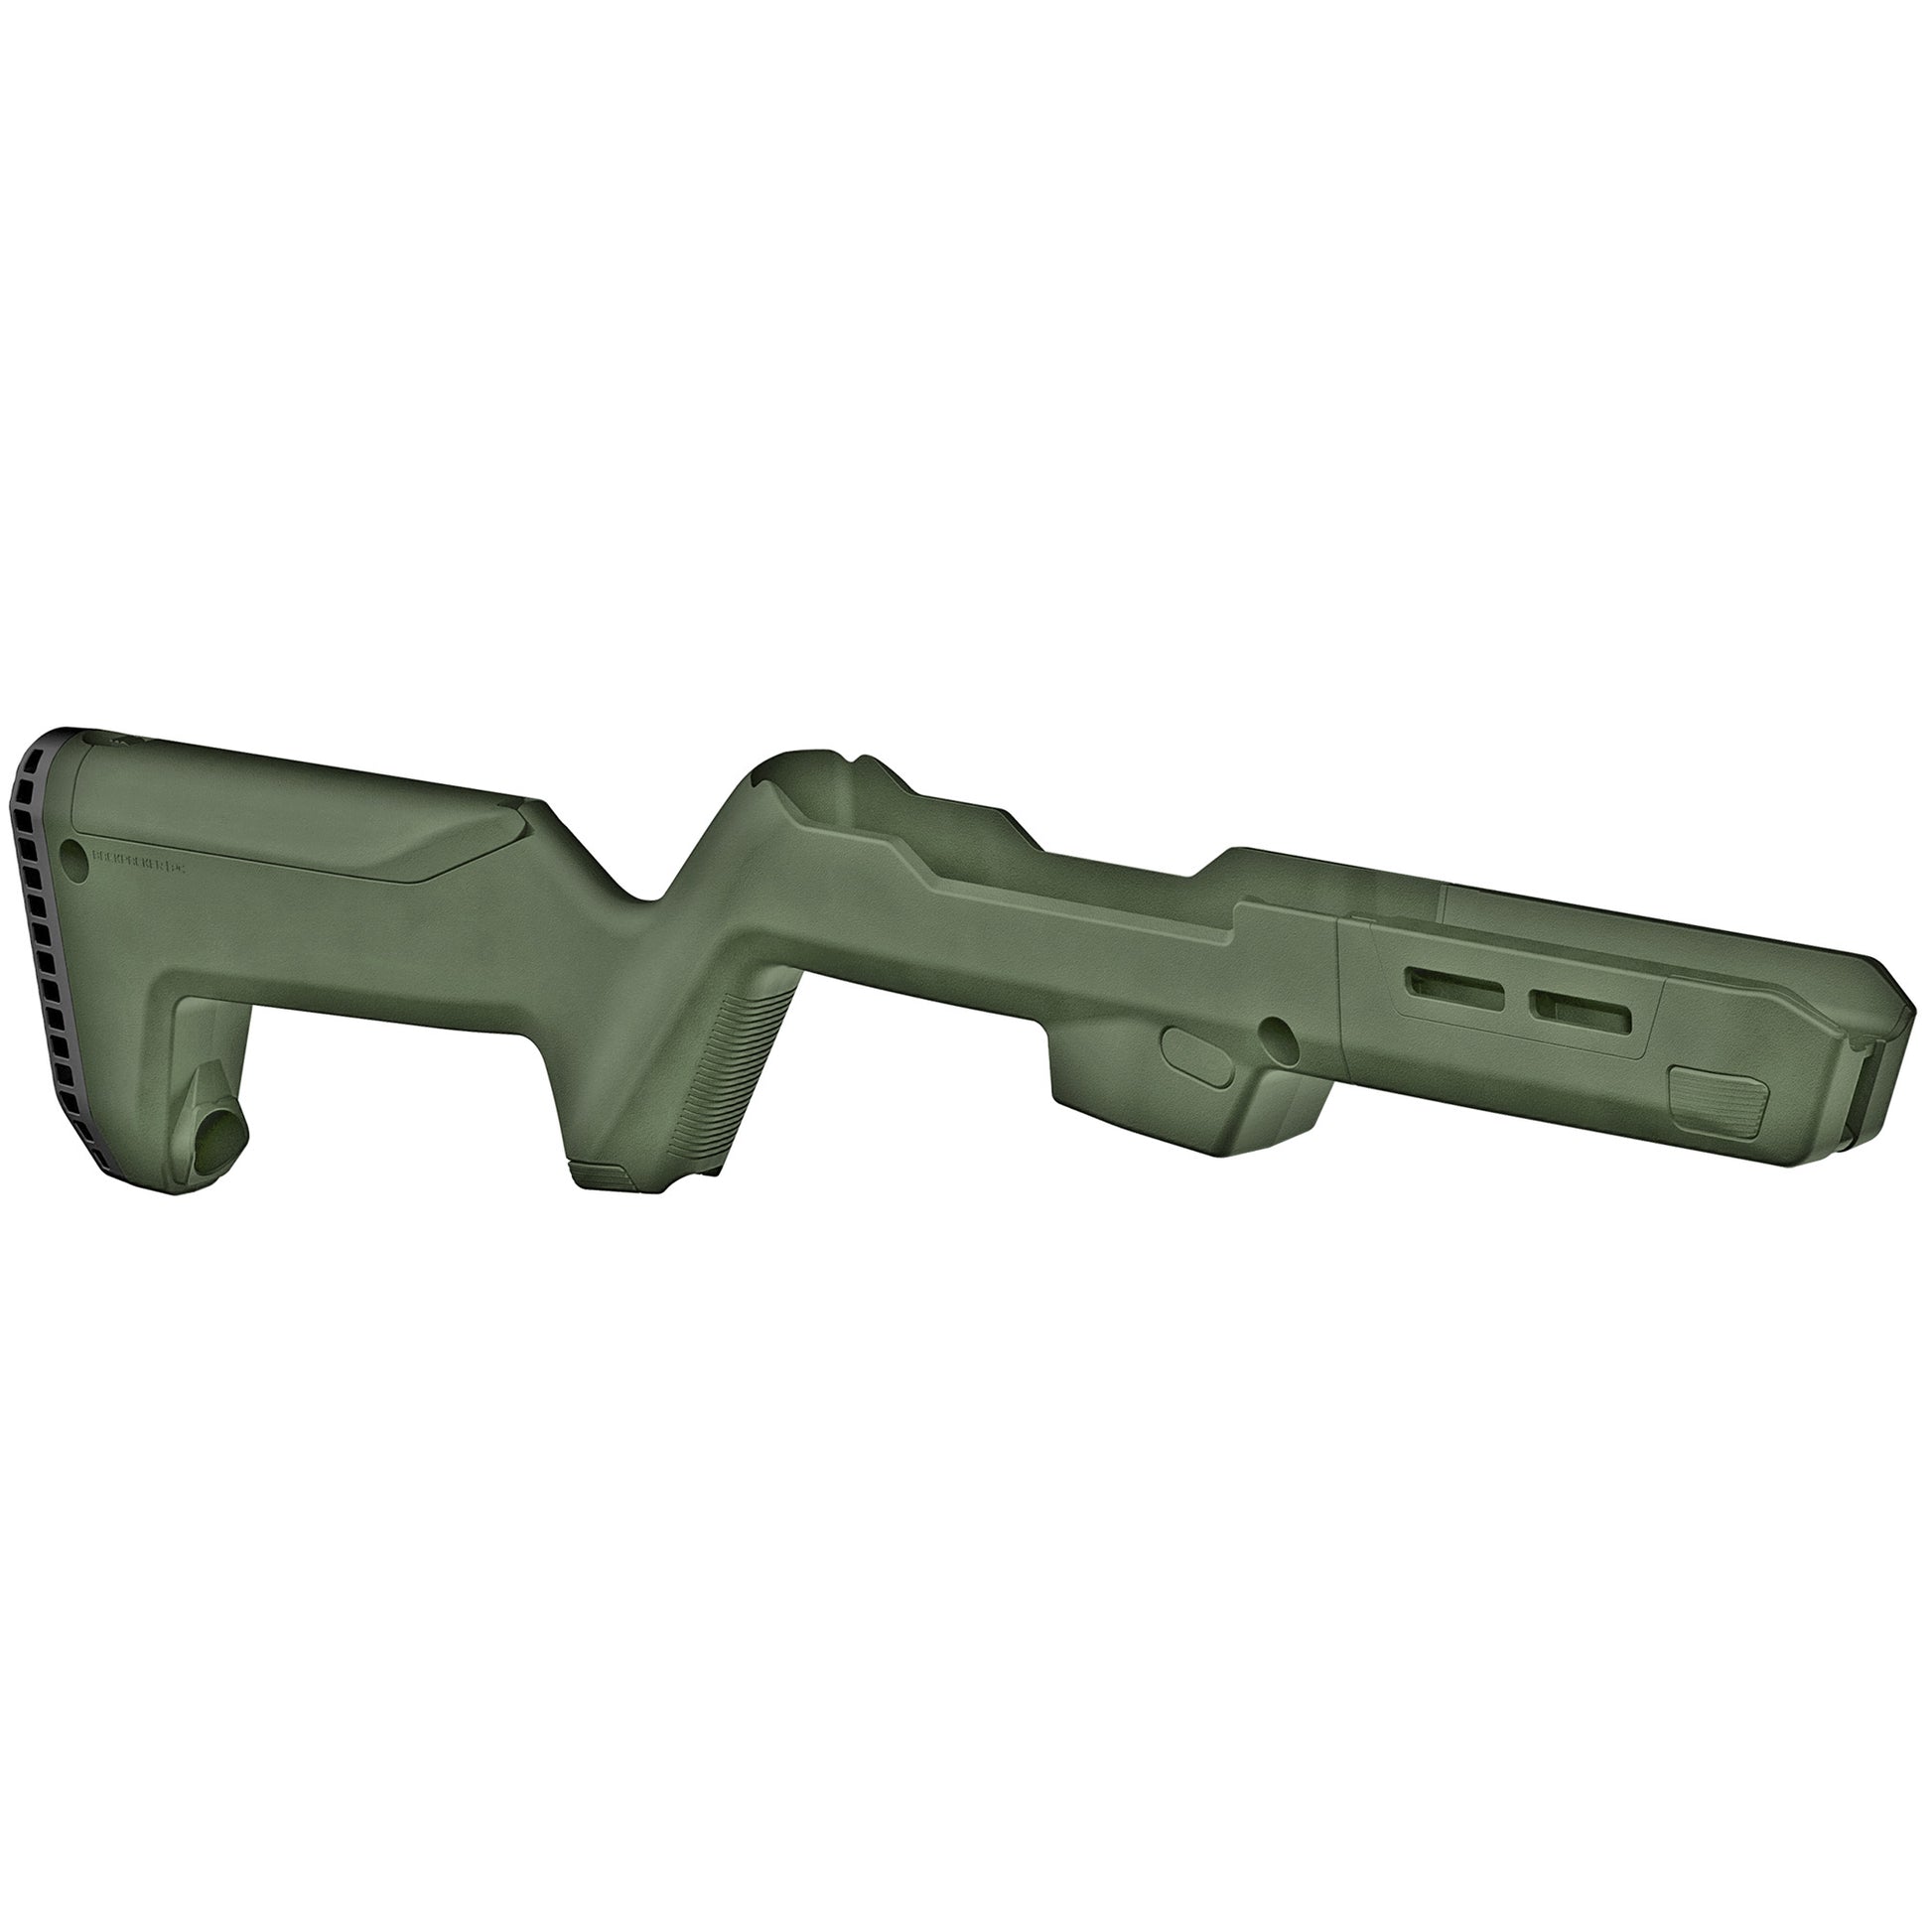 Magpul Industries PC Backpacker Stock Ruger PC Carbine ODG MAG1076-ODG - California Shooting Supplies